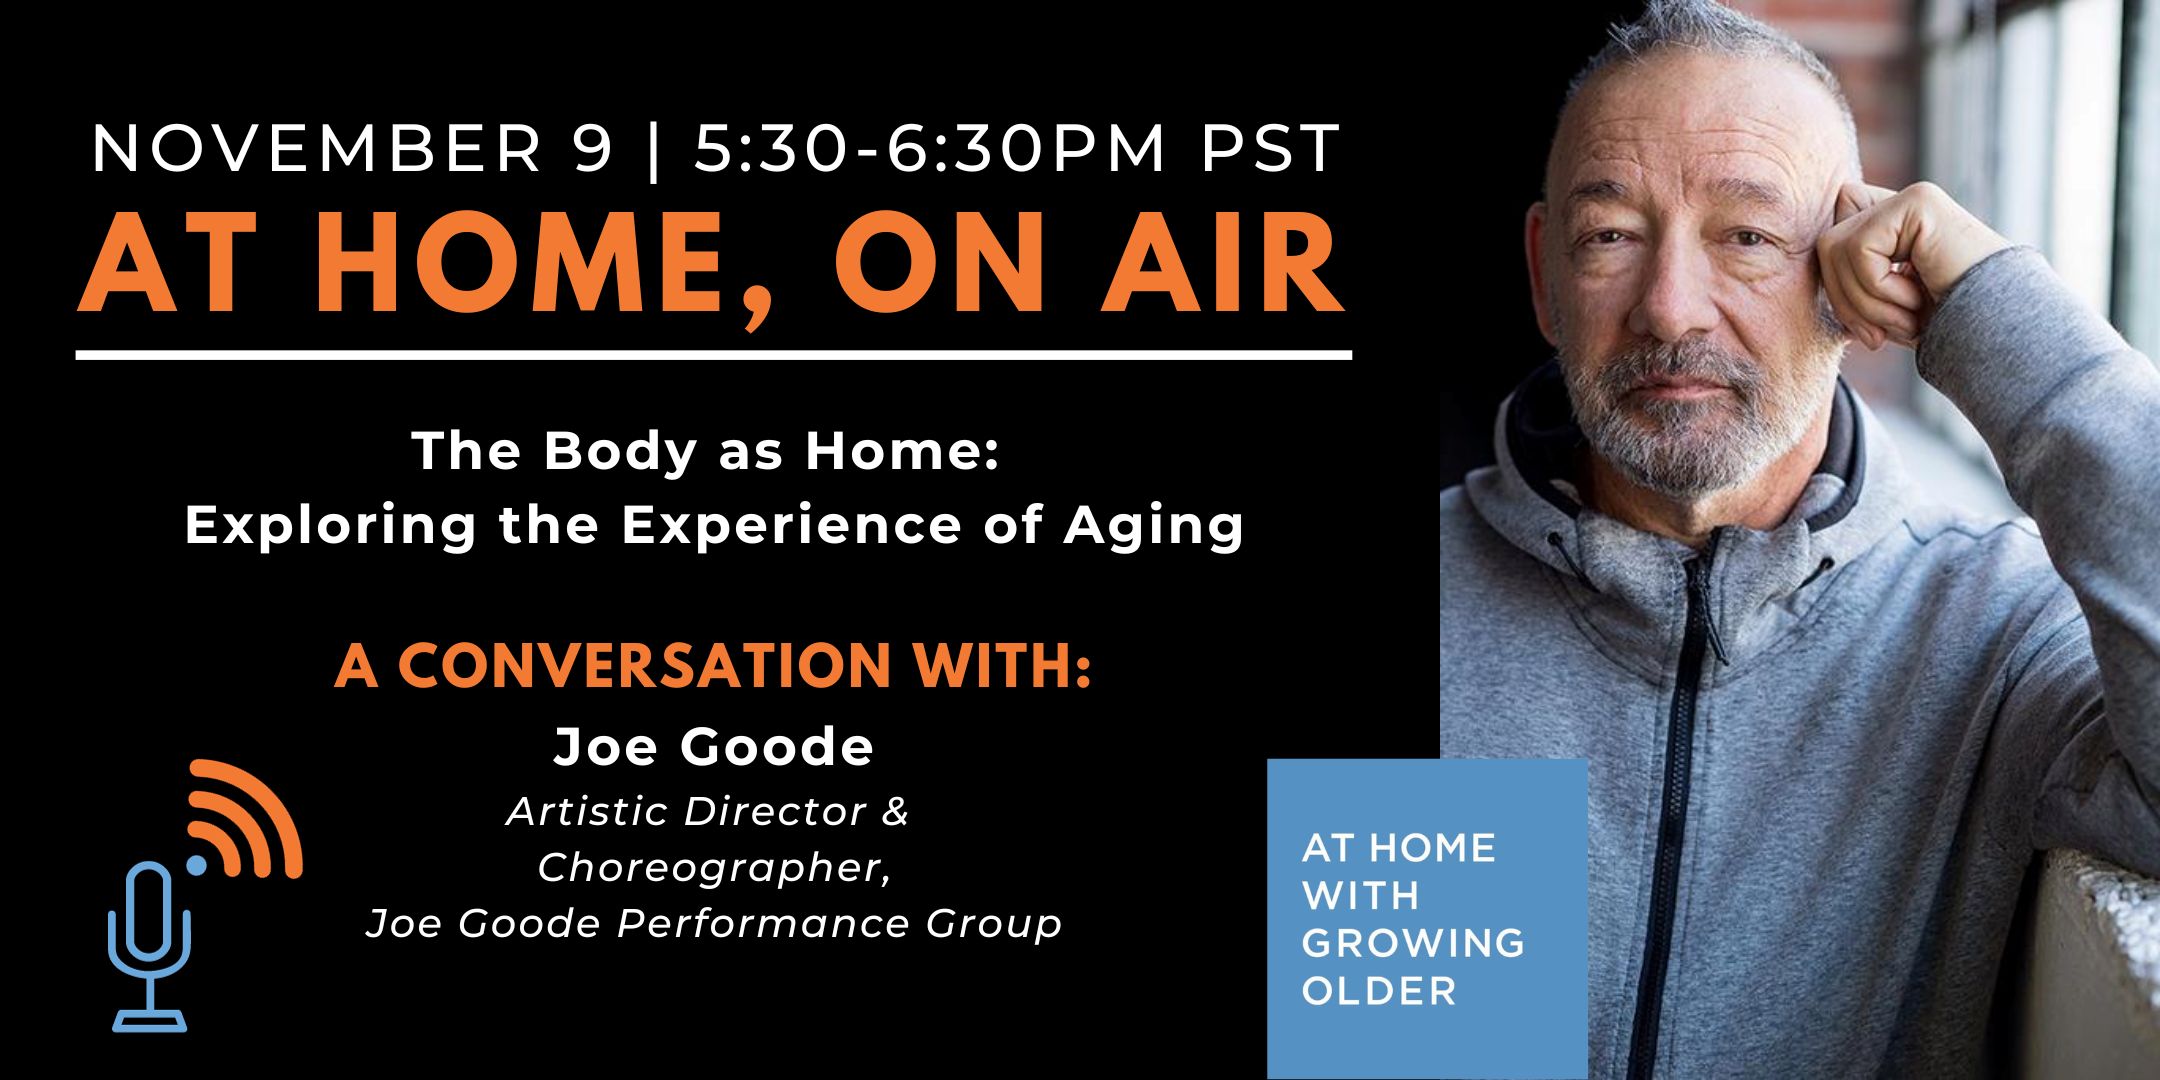 At Home, On Air: A Conversation with Joe Goode